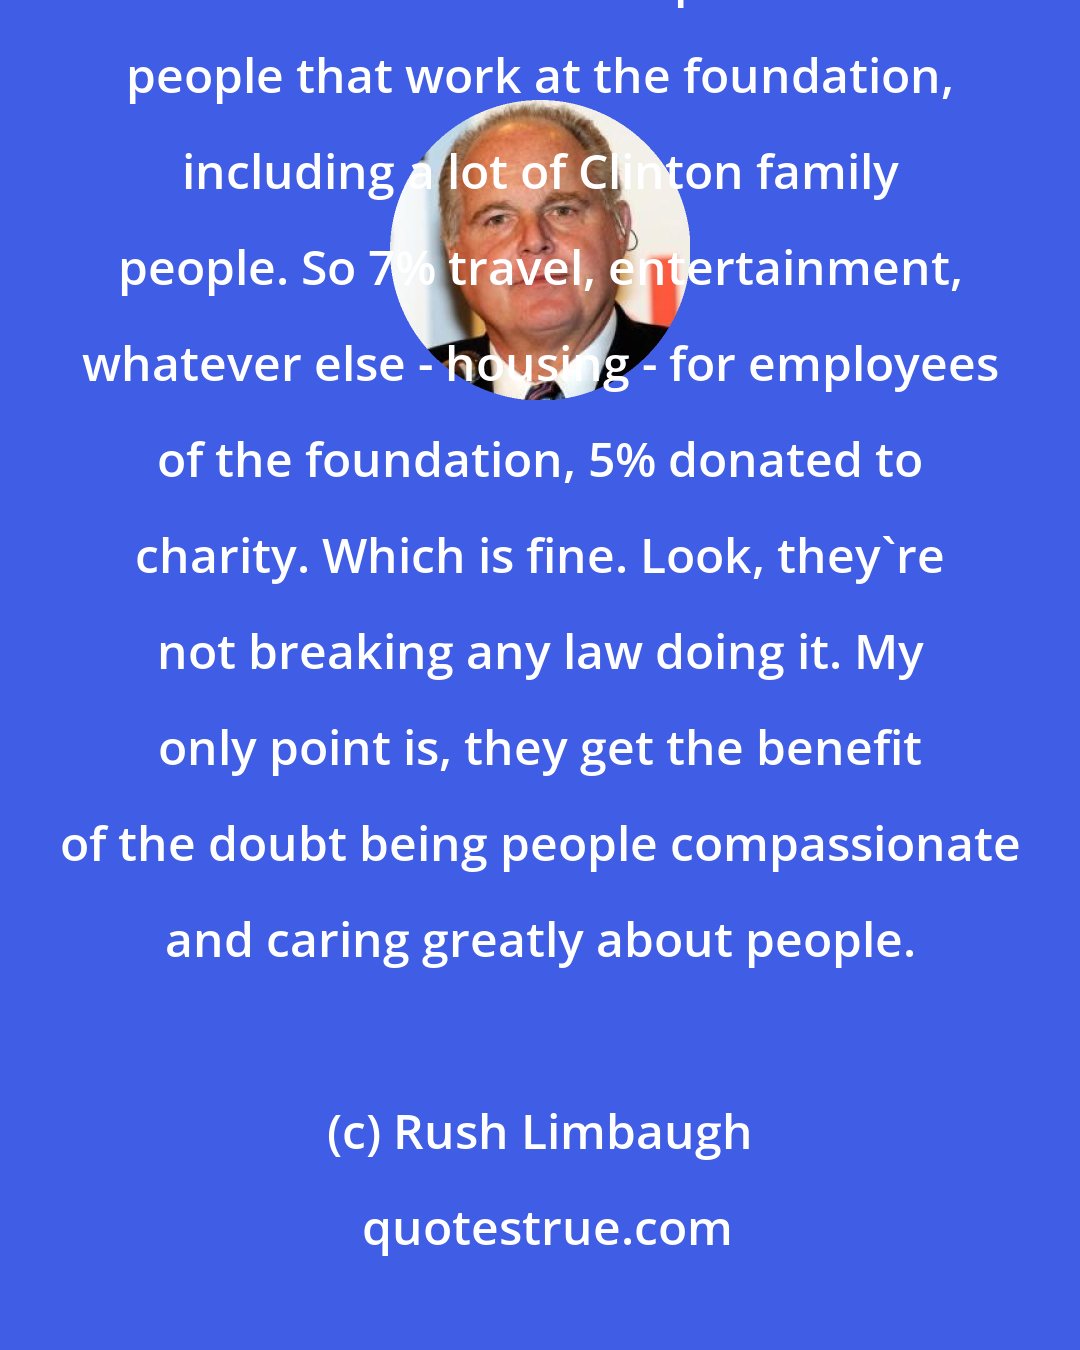 Rush Limbaugh: Seven percent of the Clinton foundation, the money raised, goes for travel and entertainment expenses for people that work at the foundation, including a lot of Clinton family people. So 7% travel, entertainment, whatever else - housing - for employees of the foundation, 5% donated to charity. Which is fine. Look, they're not breaking any law doing it. My only point is, they get the benefit of the doubt being people compassionate and caring greatly about people.